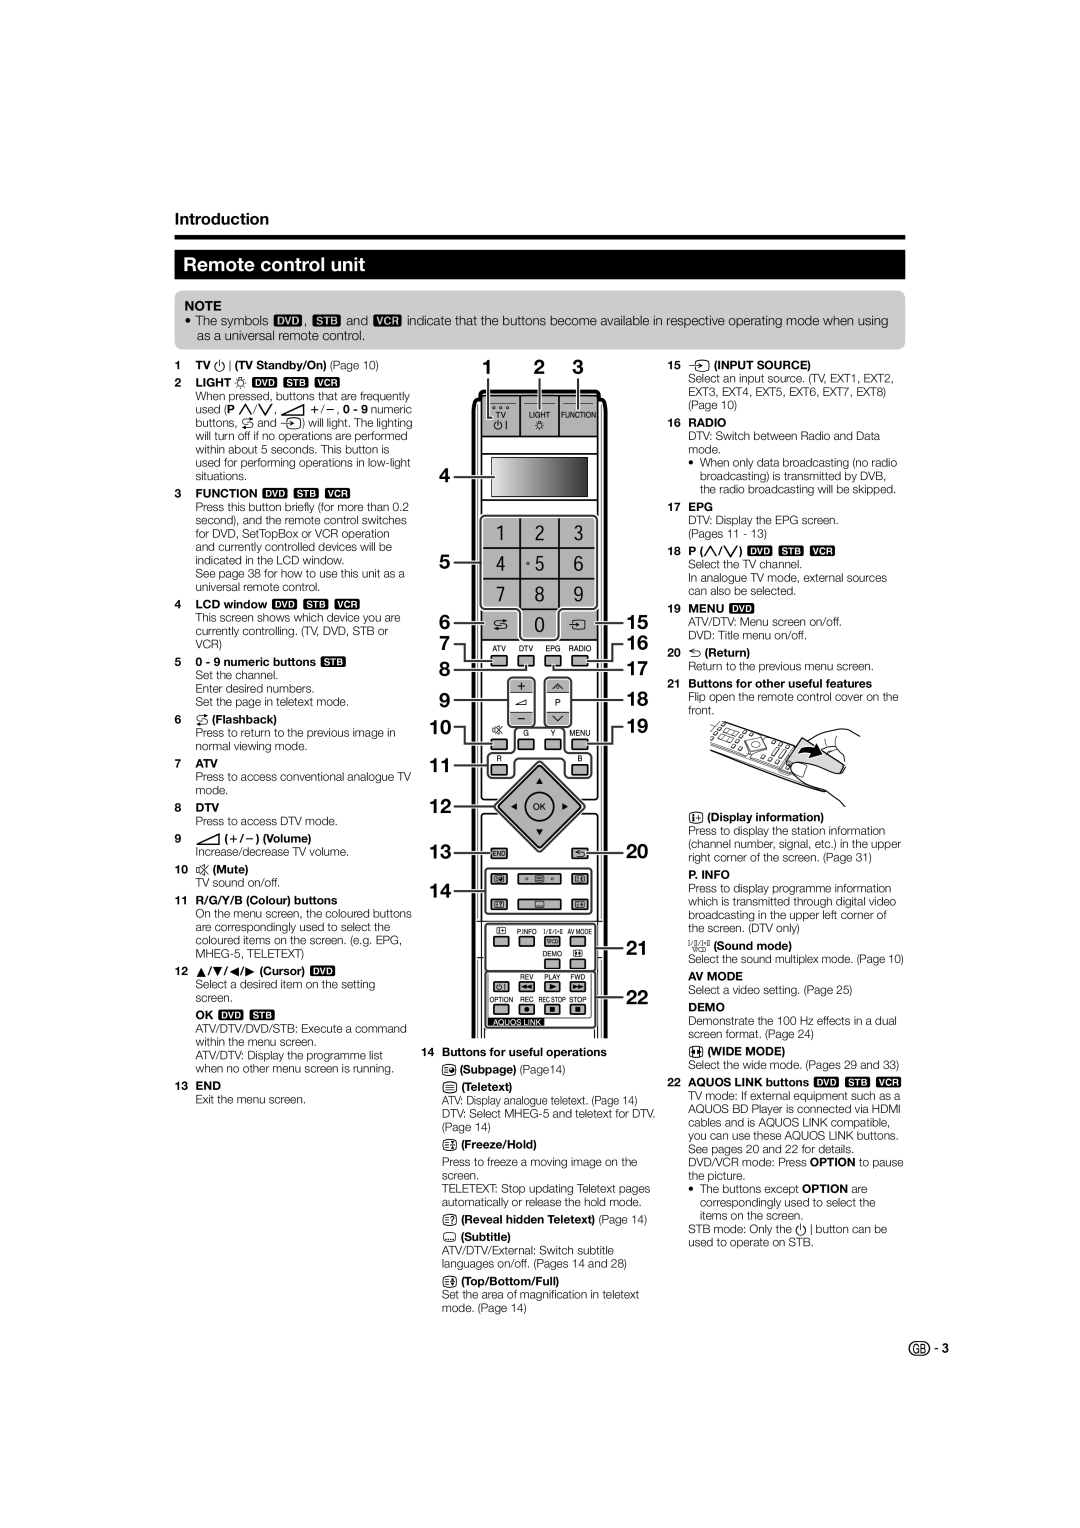 Sharp LC-52XL2E, LC-46XL2S, LC-42XL2S, LC-46XL2E, LC-42XL2E, LC-52XL2S operation manual Remote control unit, Introduction 